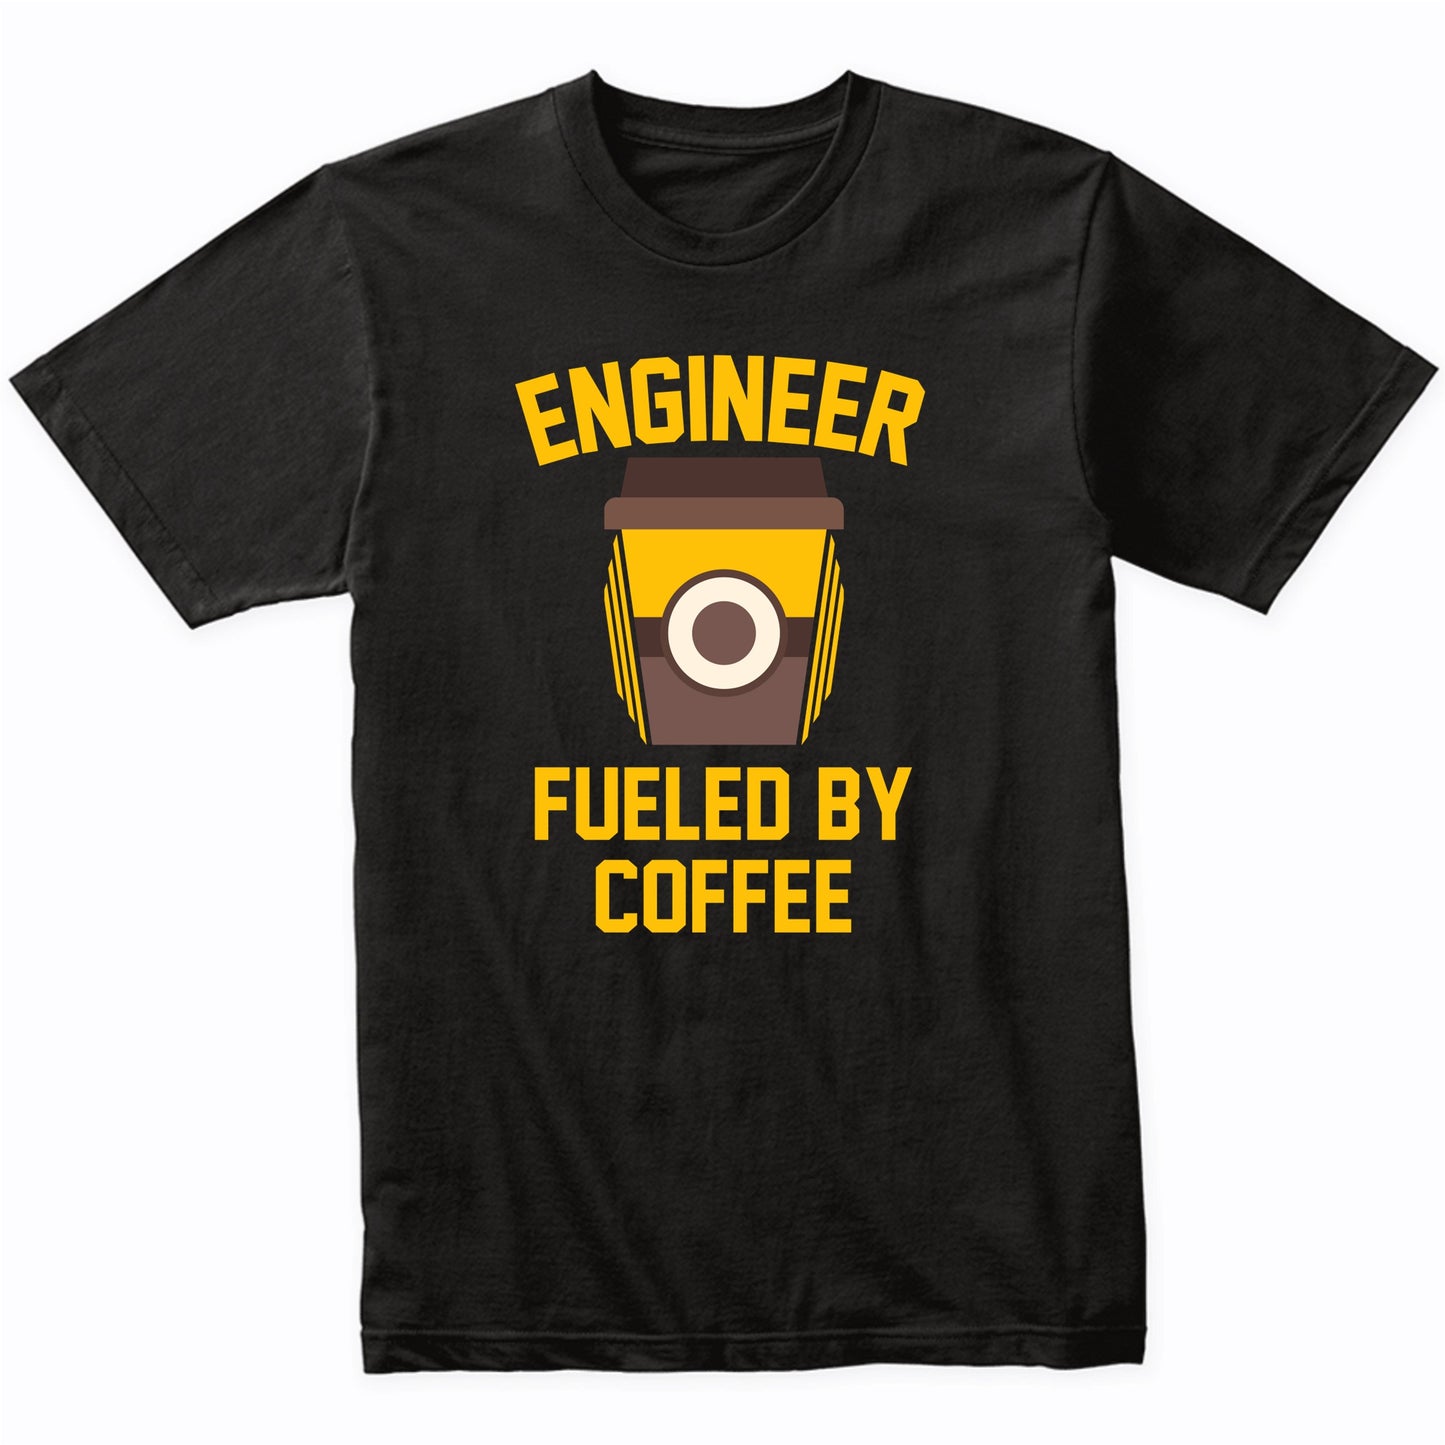 Engineer Fueled By Coffee Funny Engineering Shirt